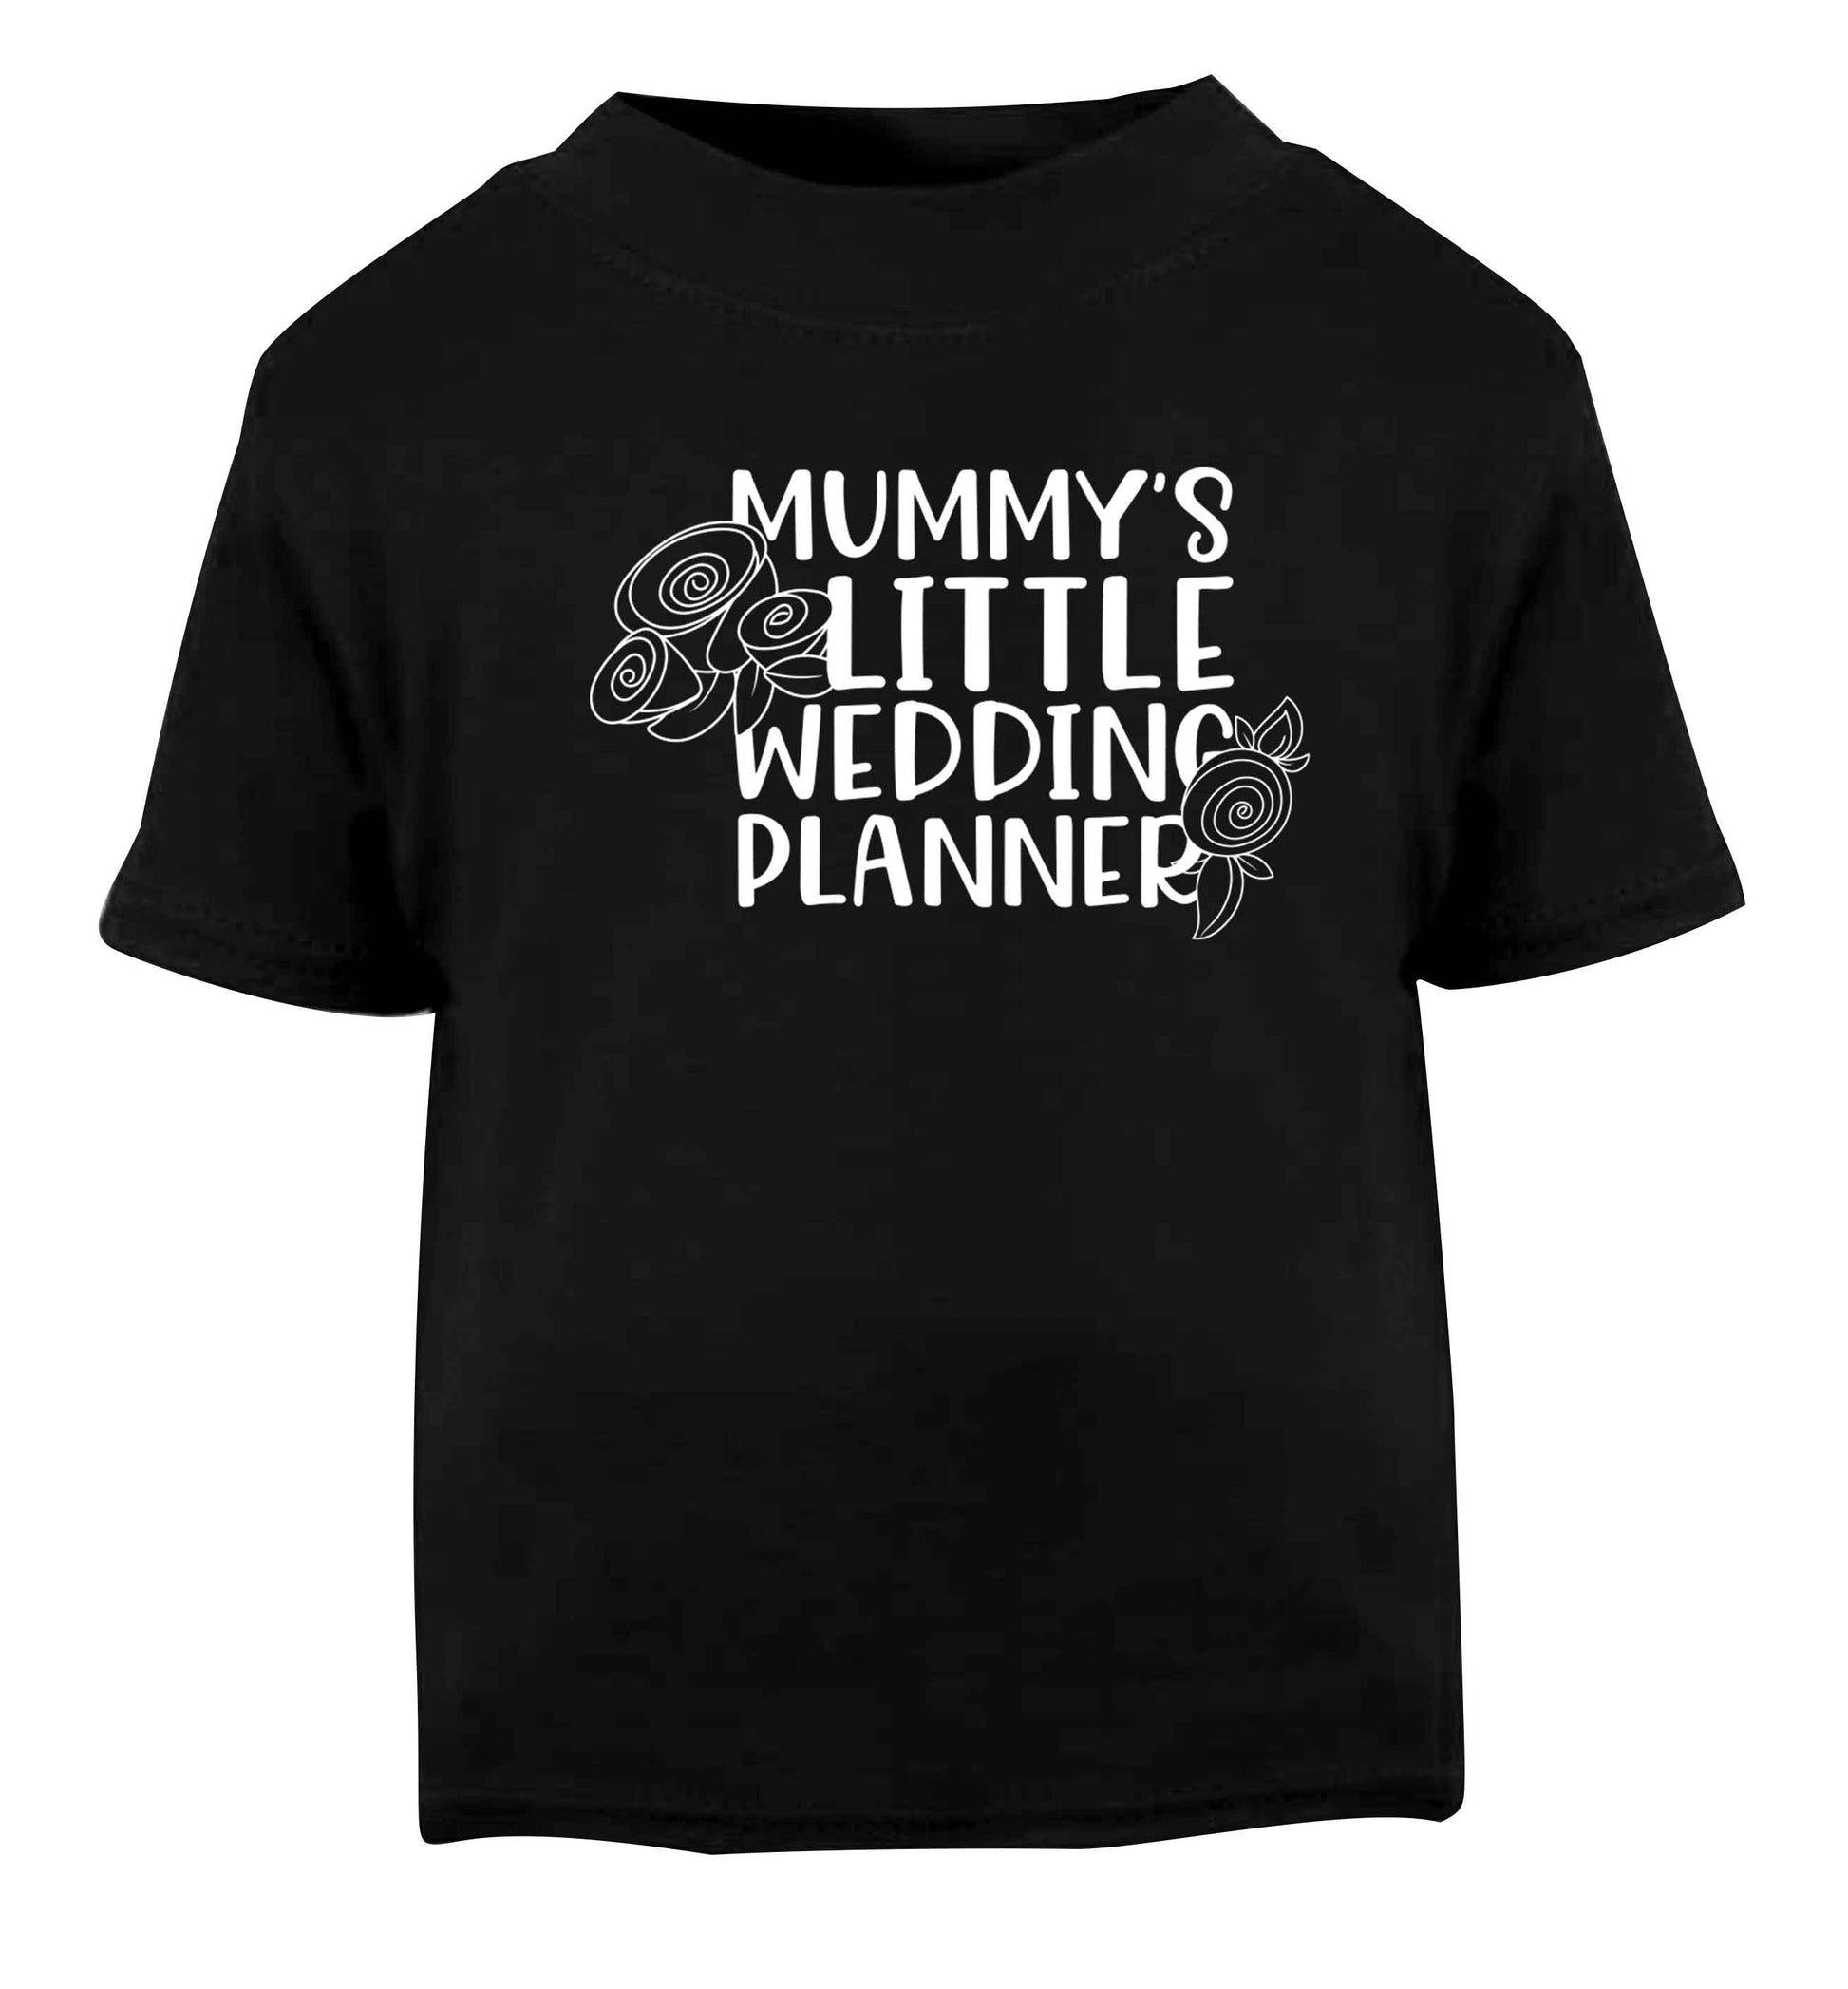 adorable wedding themed gifts for your mini wedding planner! Black baby toddler Tshirt 2 years